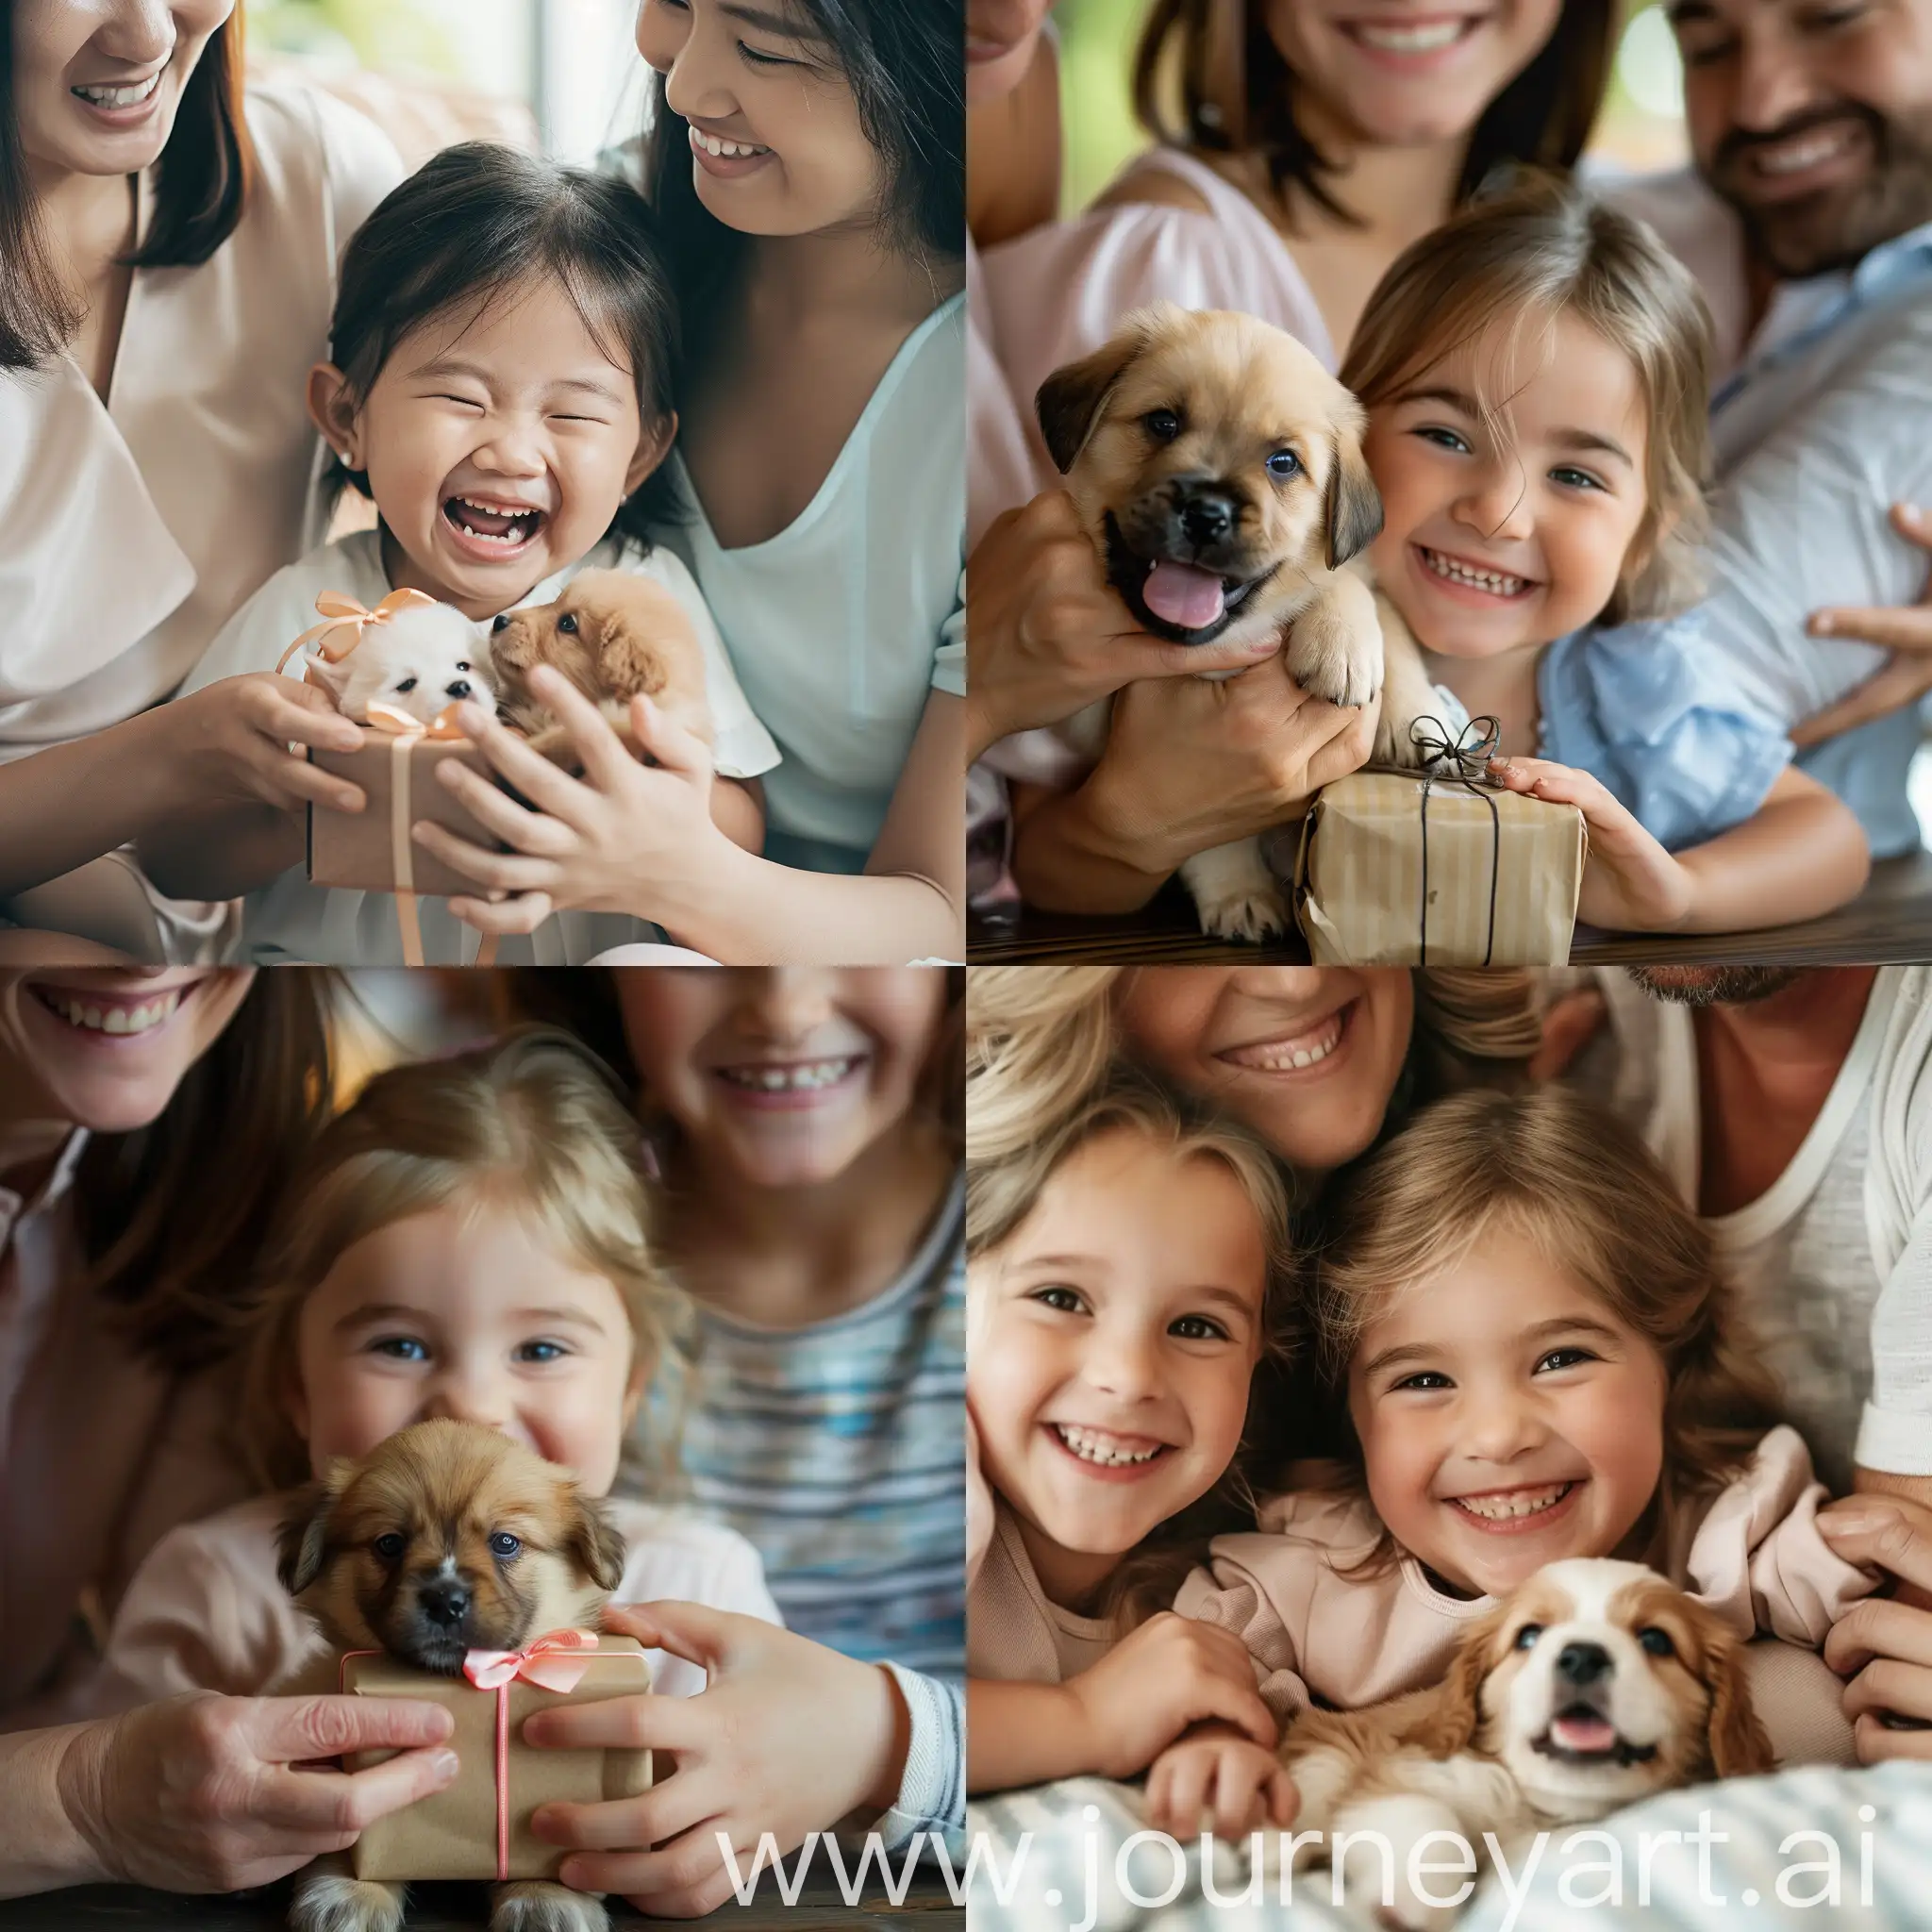  a little cute girl who are really happy with the gift the her parents give to her is a puppy